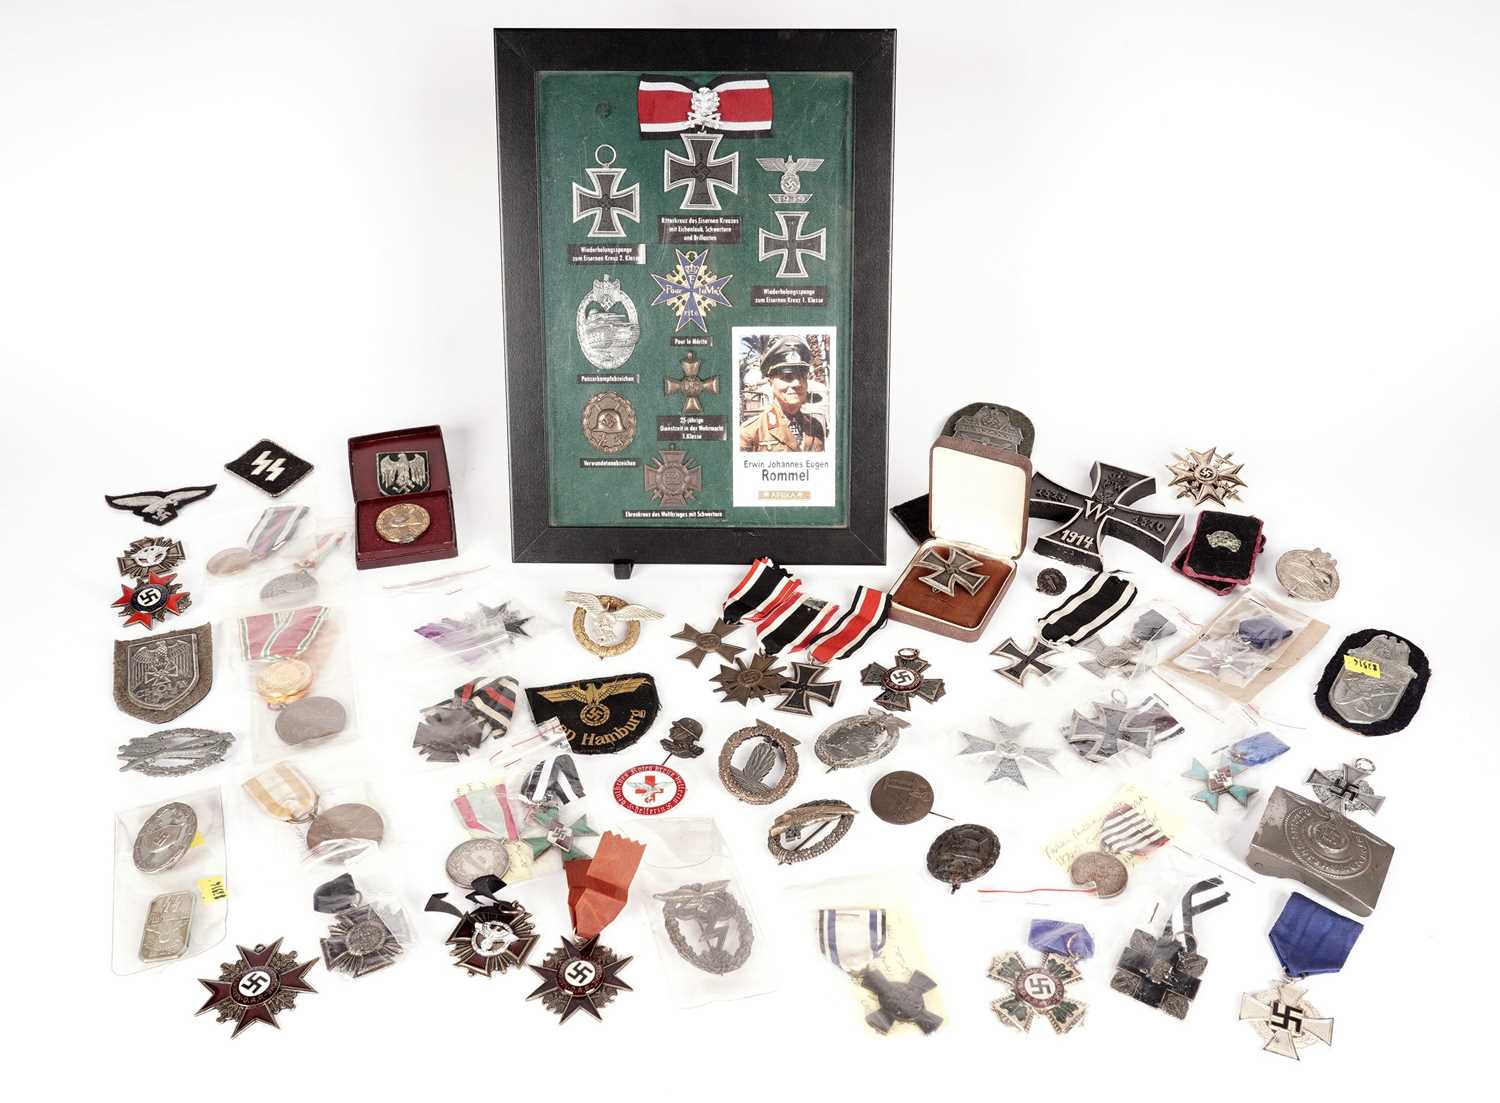 A collection of German WWII style replica military items